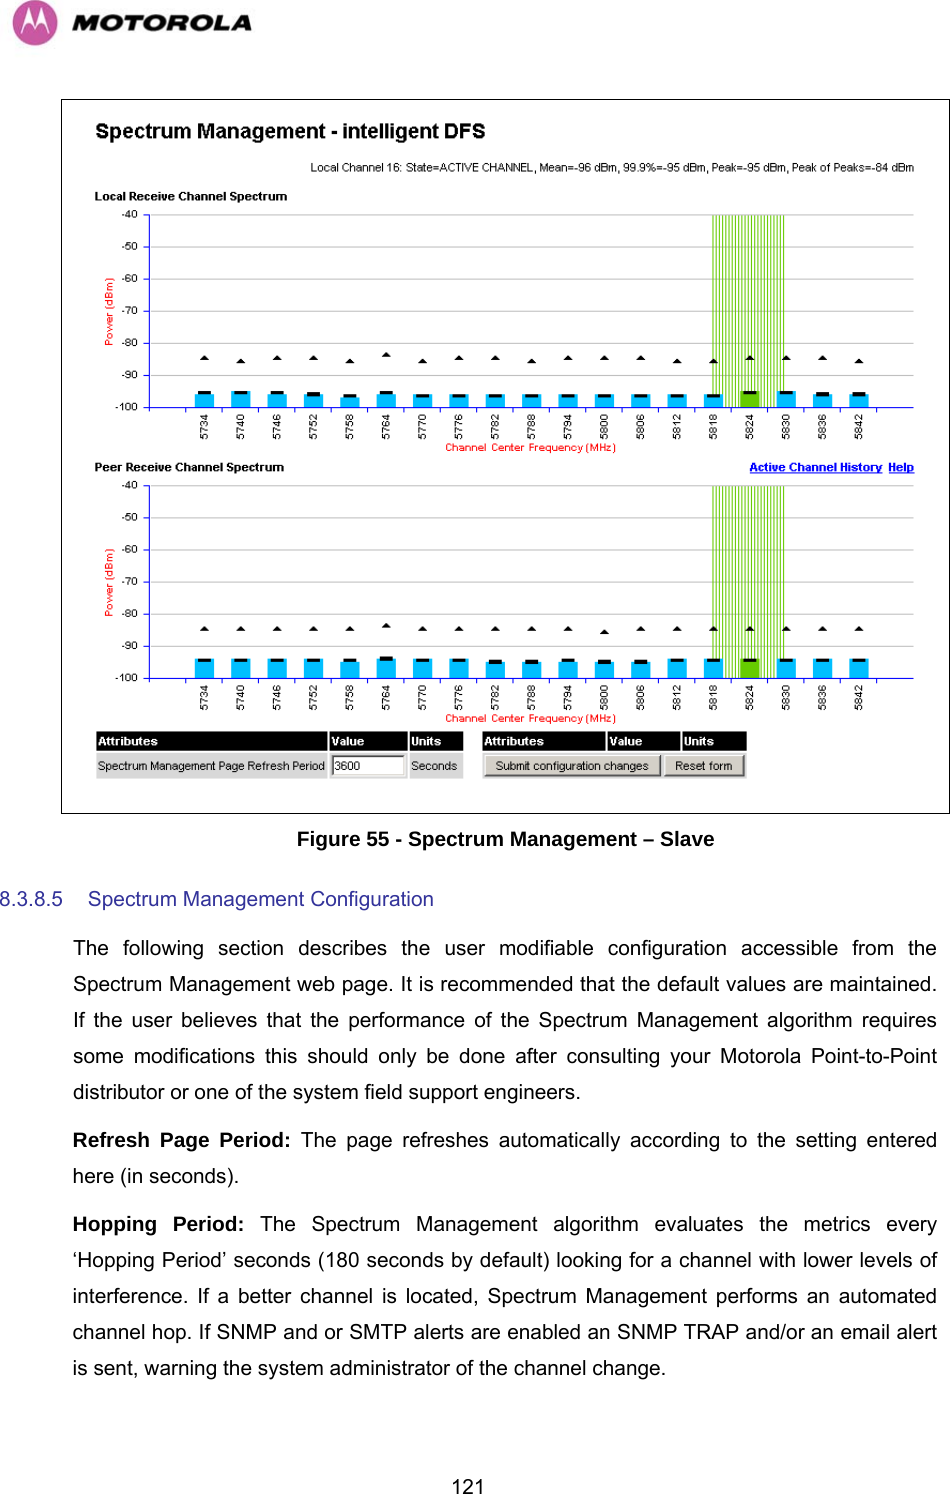   121 Figure 55 - Spectrum Management – Slave 8.3.8.5  Spectrum Management Configuration  The following section describes the user modifiable configuration accessible from the Spectrum Management web page. It is recommended that the default values are maintained. If the user believes that the performance of the Spectrum Management algorithm requires some modifications this should only be done after consulting your Motorola Point-to-Point distributor or one of the system field support engineers. Refresh Page Period: The page refreshes automatically according to the setting entered here (in seconds).  Hopping Period: The Spectrum Management algorithm evaluates the metrics every ‘Hopping Period’ seconds (180 seconds by default) looking for a channel with lower levels of interference. If a better channel is located, Spectrum Management performs an automated channel hop. If SNMP and or SMTP alerts are enabled an SNMP TRAP and/or an email alert is sent, warning the system administrator of the channel change. 